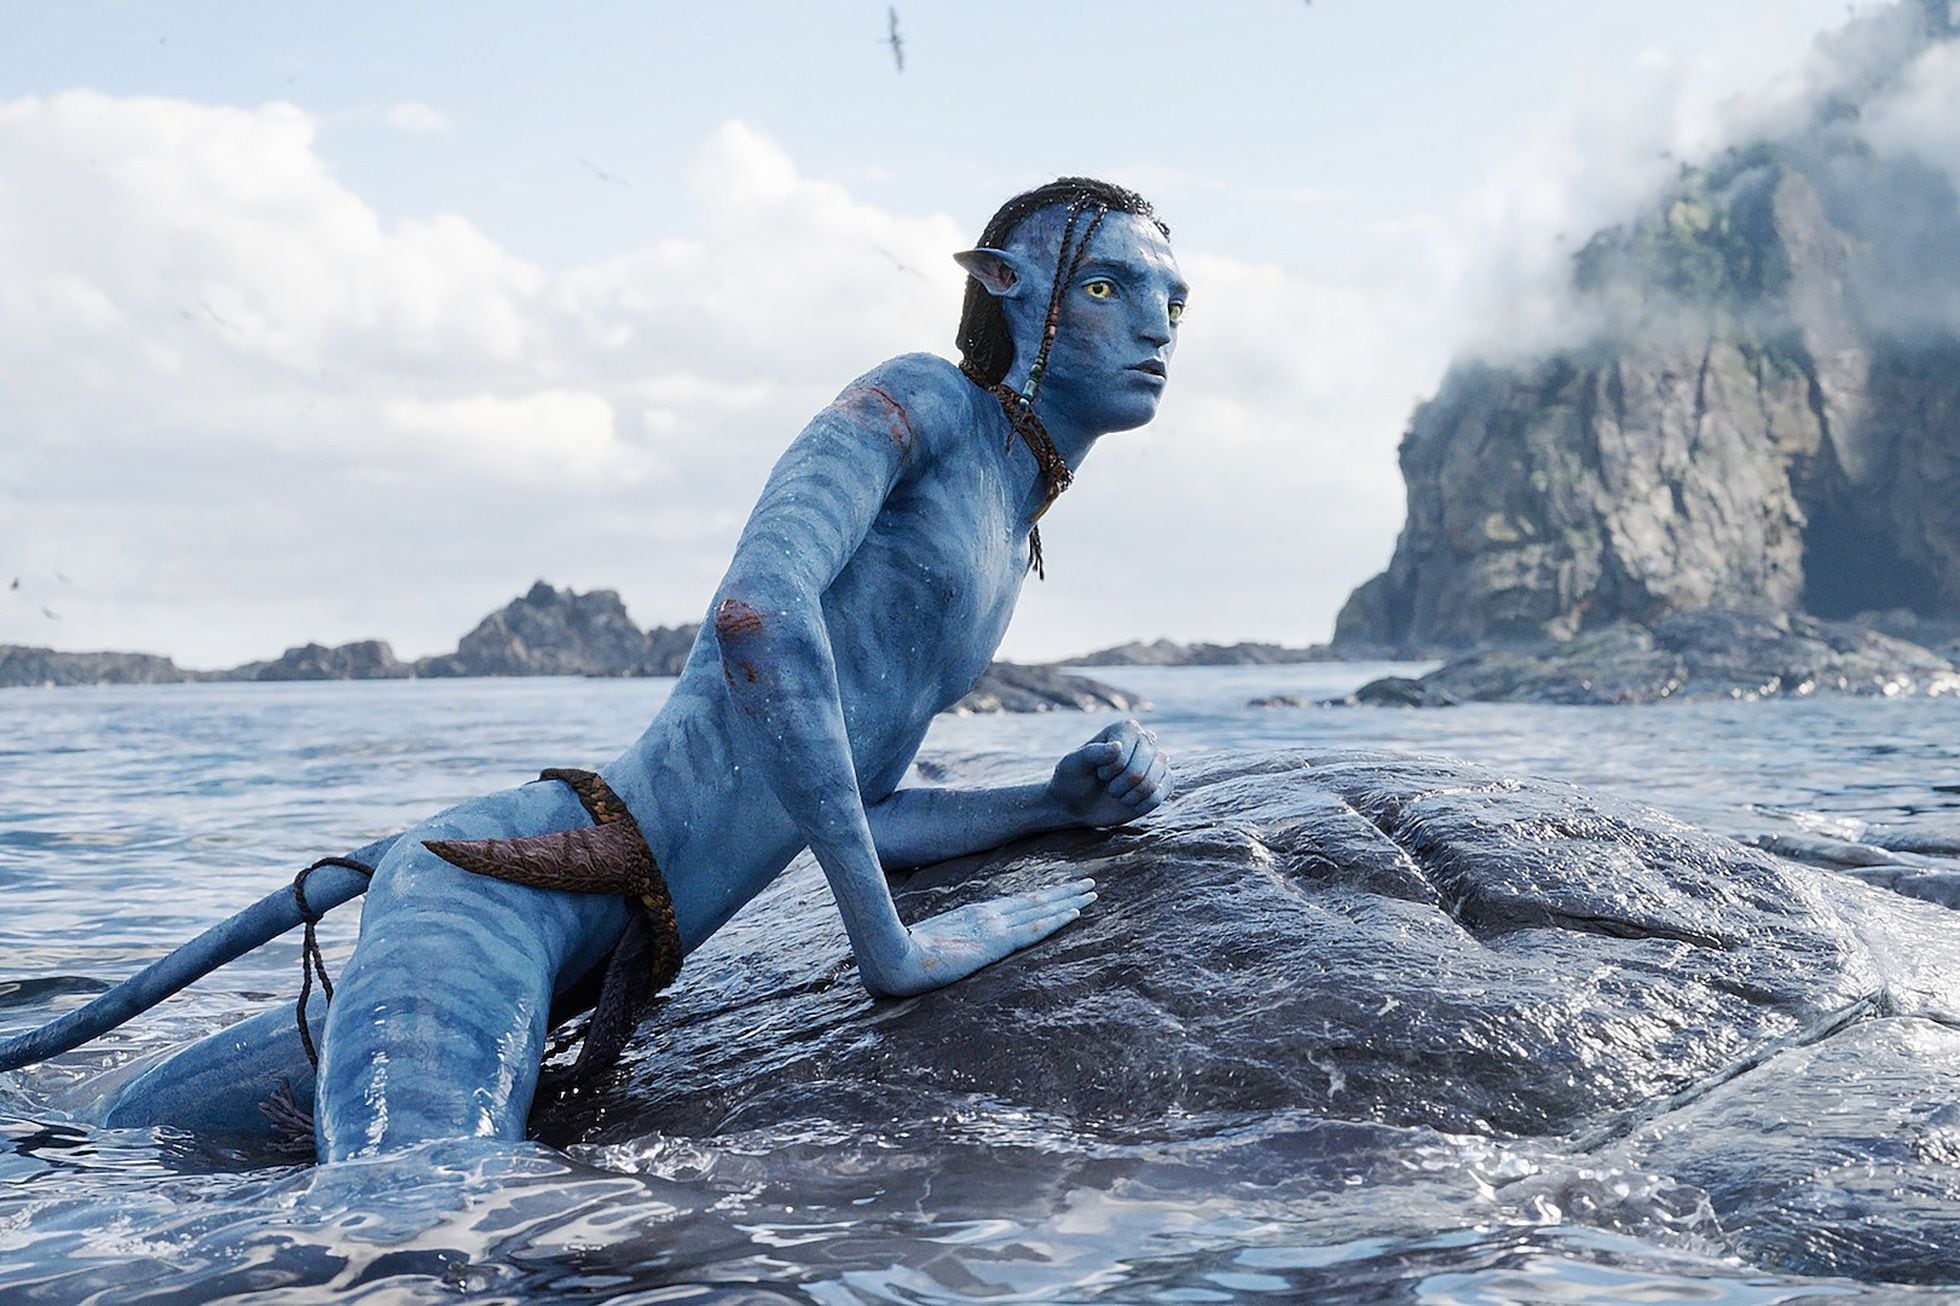 Assistir The Kings Avatar 2 Online completo